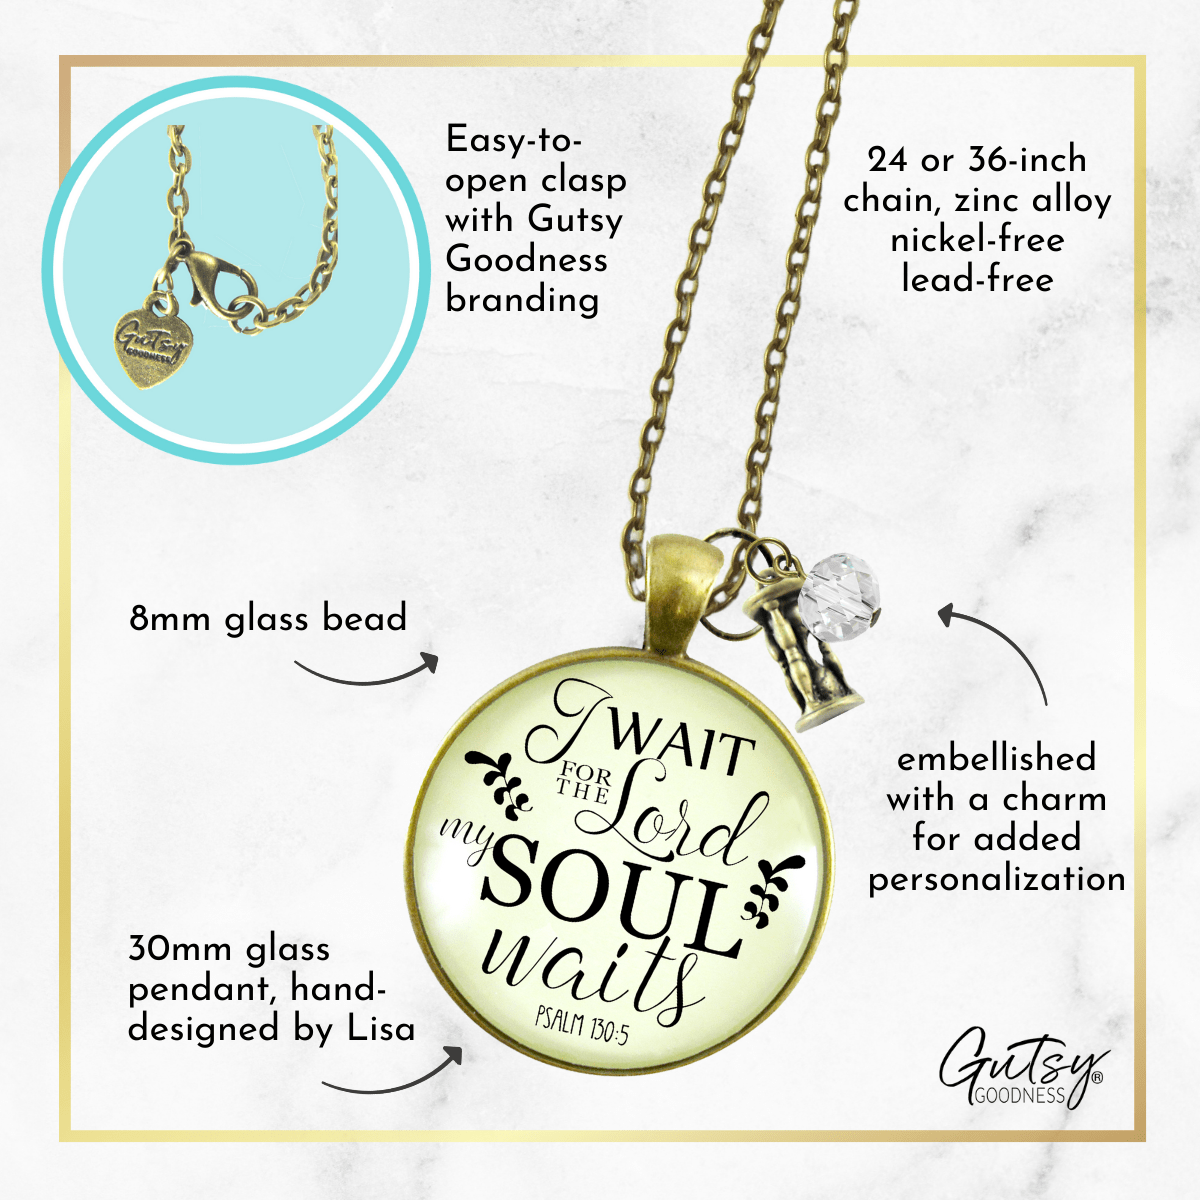 Gutsy Goodness Christian Necklace I Wait for Lord Psalm Bible Word Meaning Jewelry - Gutsy Goodness;Christian Necklace I Wait For Lord Psalm Bible Word Meaning Jewelry - Gutsy Goodness Handmade Jewelry Gifts